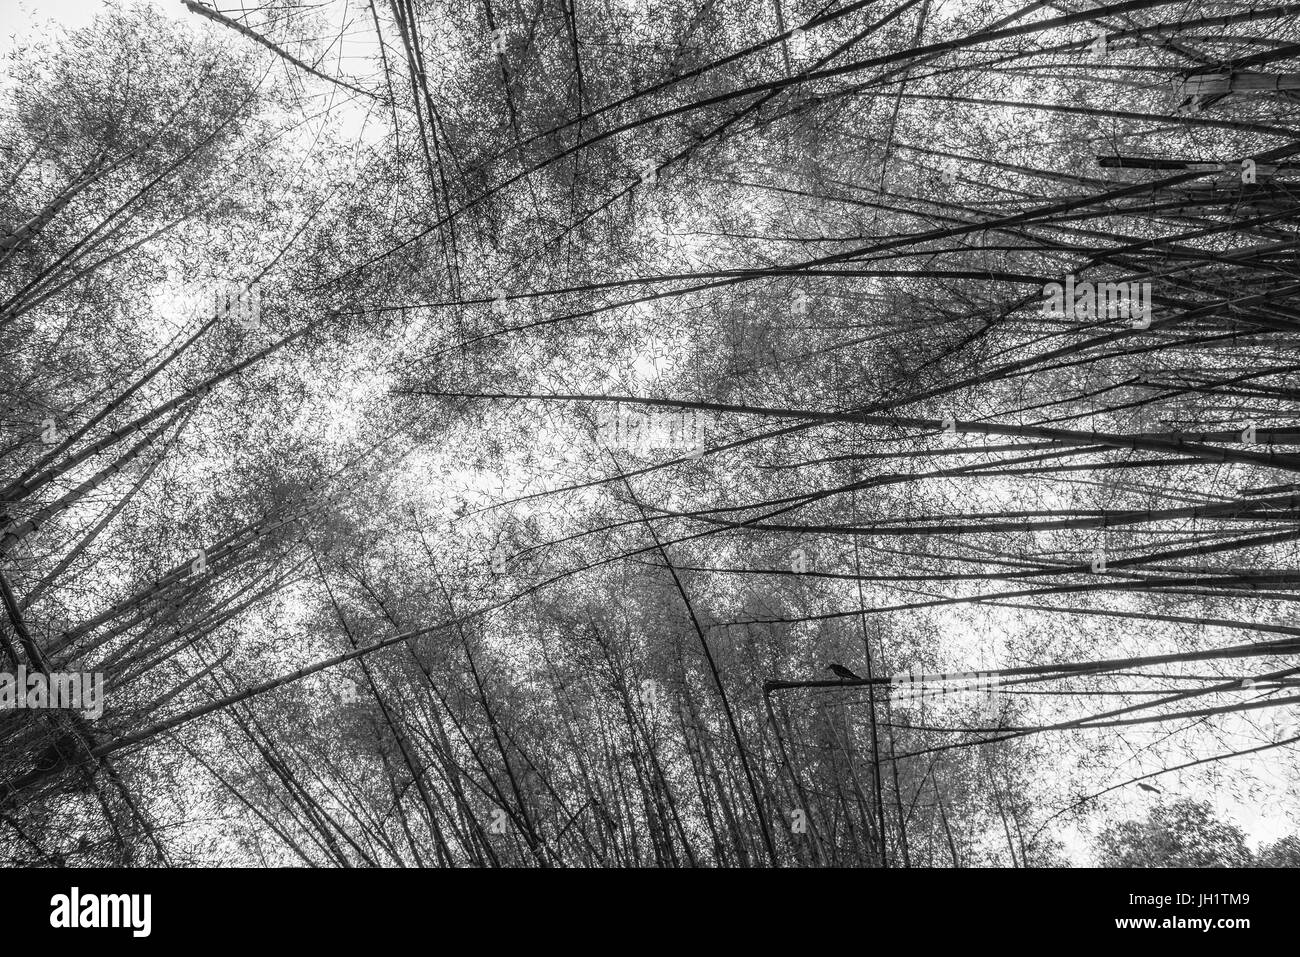 Canopy formed by tall bamboo trees in black and white Stock Photo